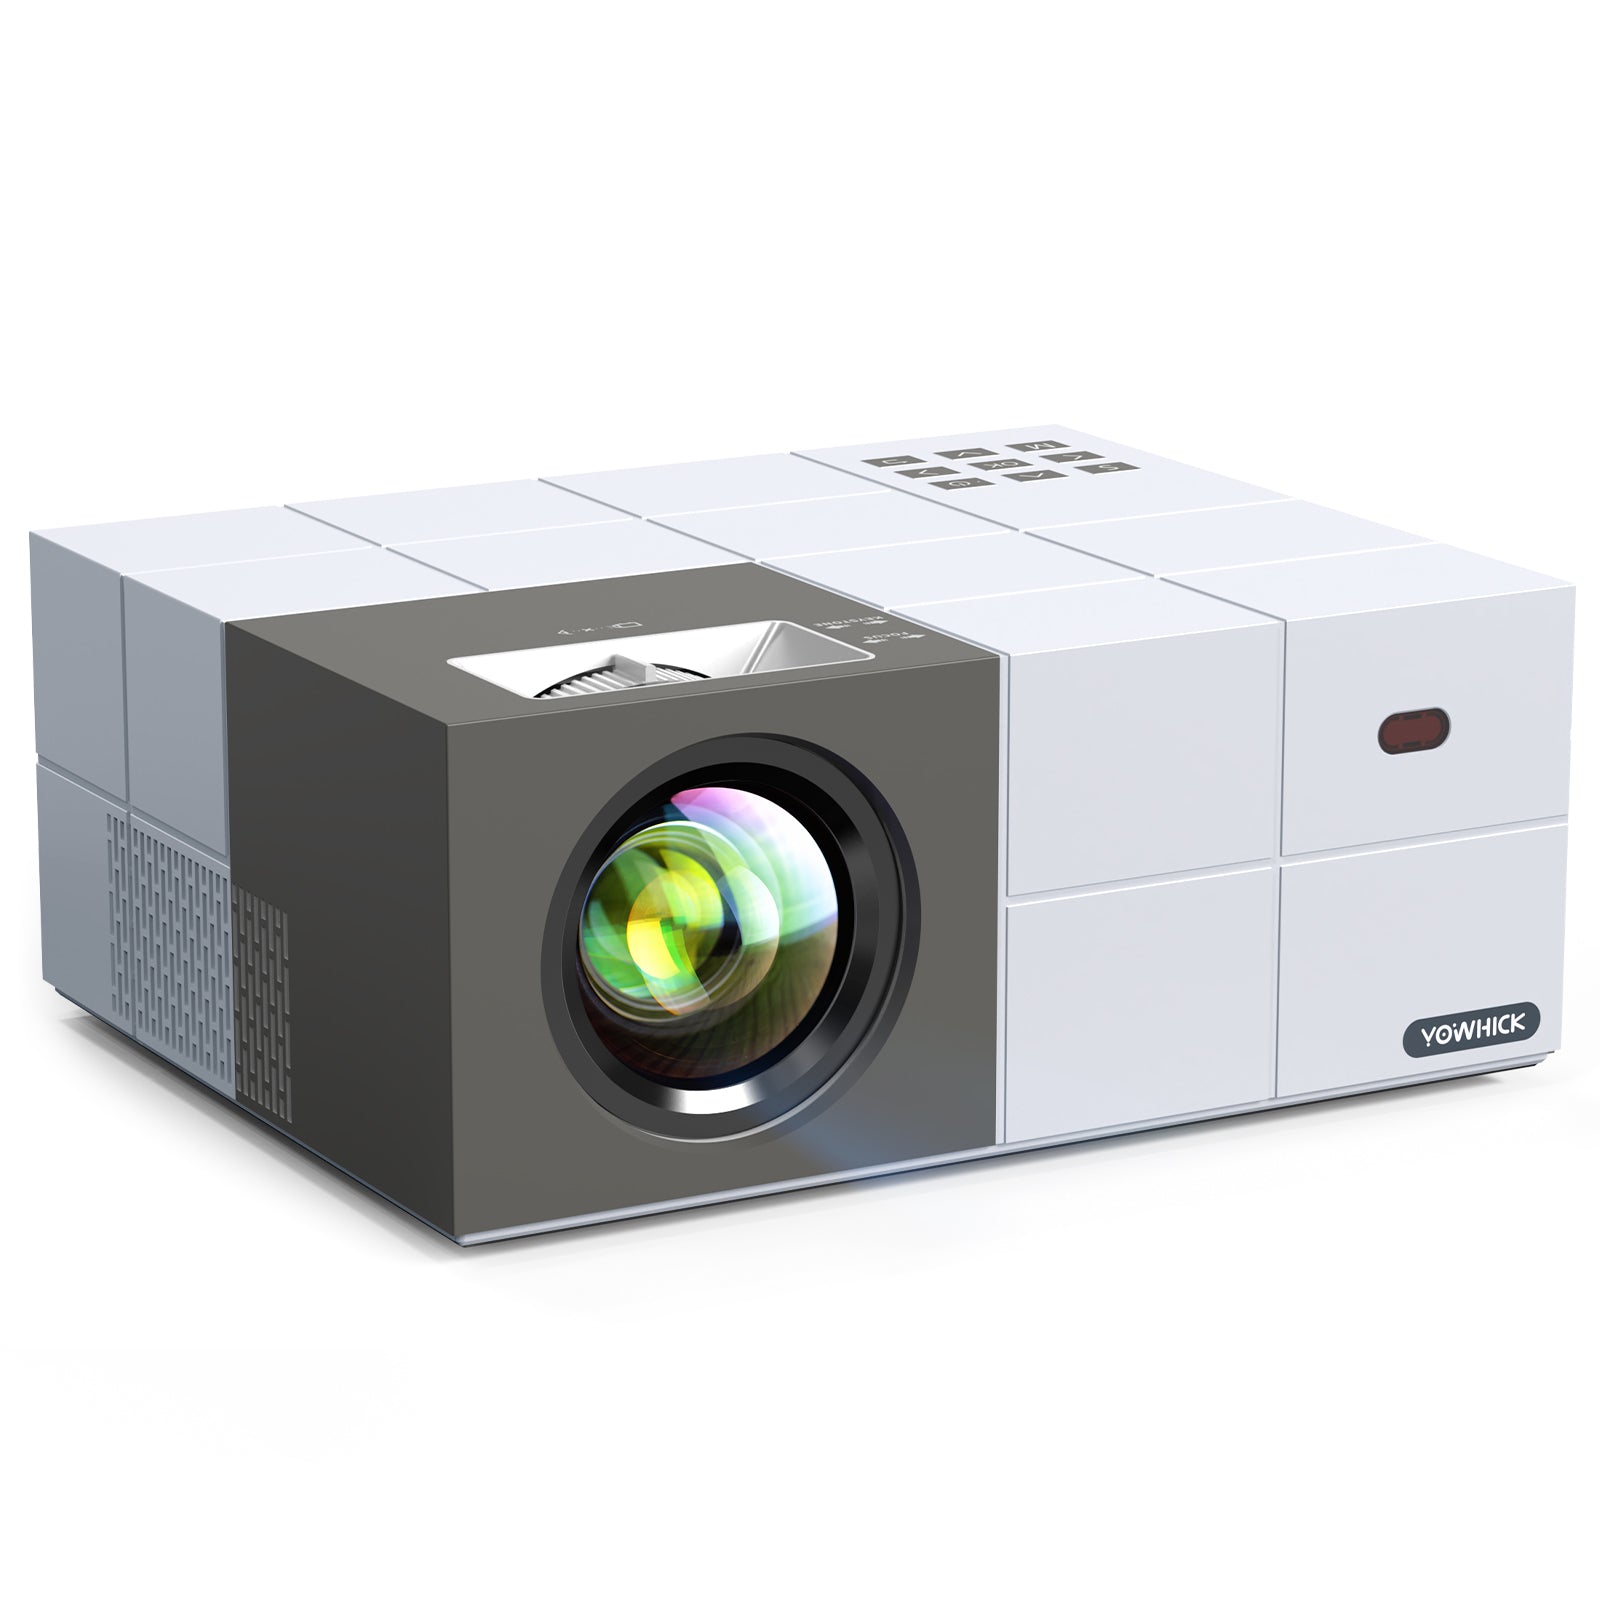 Native 1080P 5G WiFi Bluetooth Projector 4K Support, GDP1W